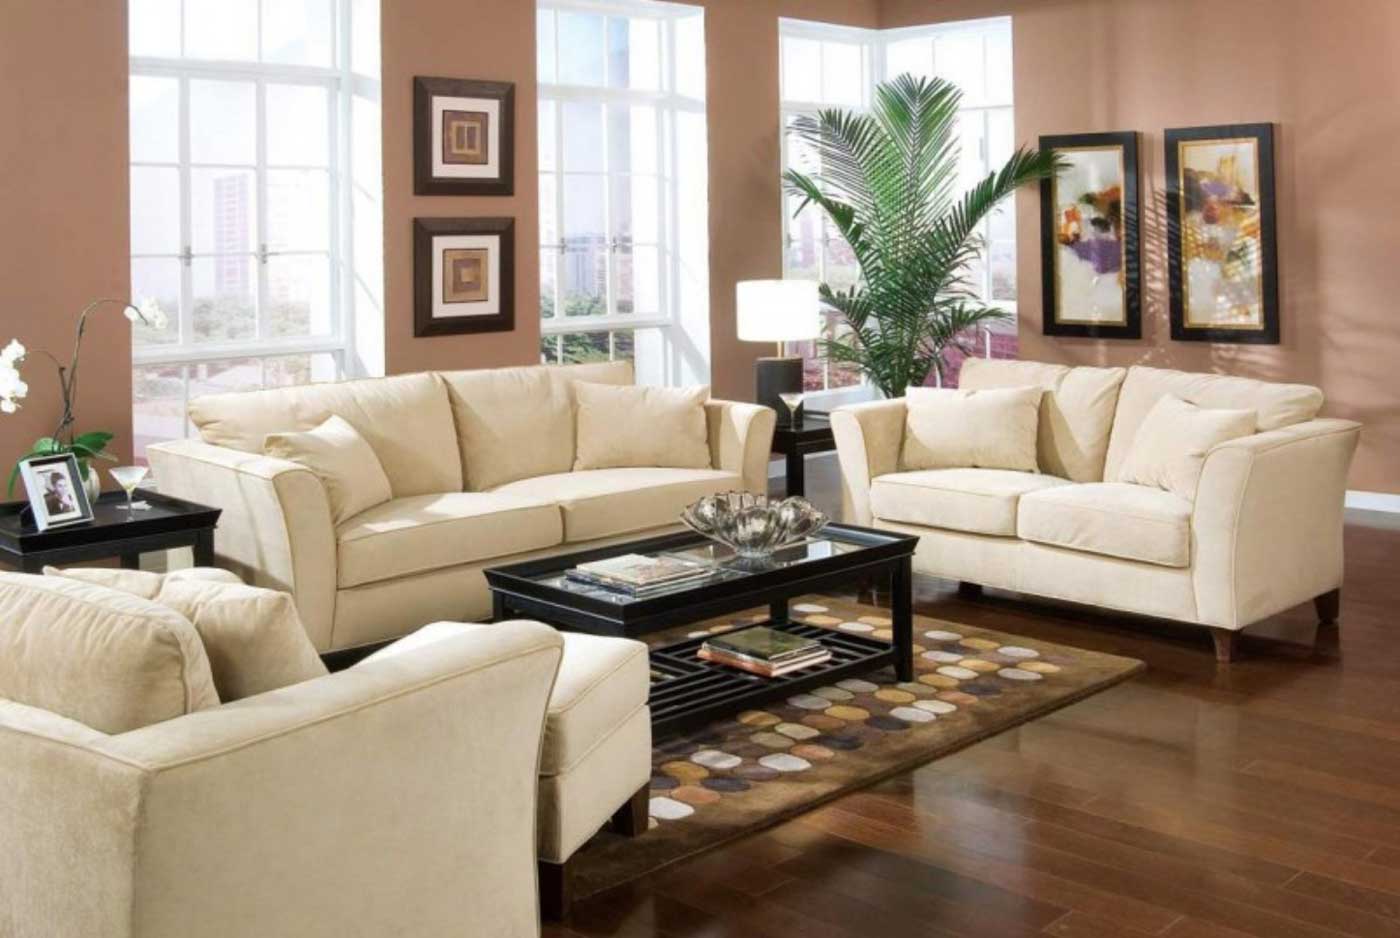 Modern Living For Splendid Modern Living Room Sets For Small Living Room Design Ideas With Inspiring White Sofa Set Design And Classy Black Coffee Table Idea Also Dark Wood Flooring Design Plus Thick Carpet Living Room Beautiful Living Room Sets As Suitable Furniture